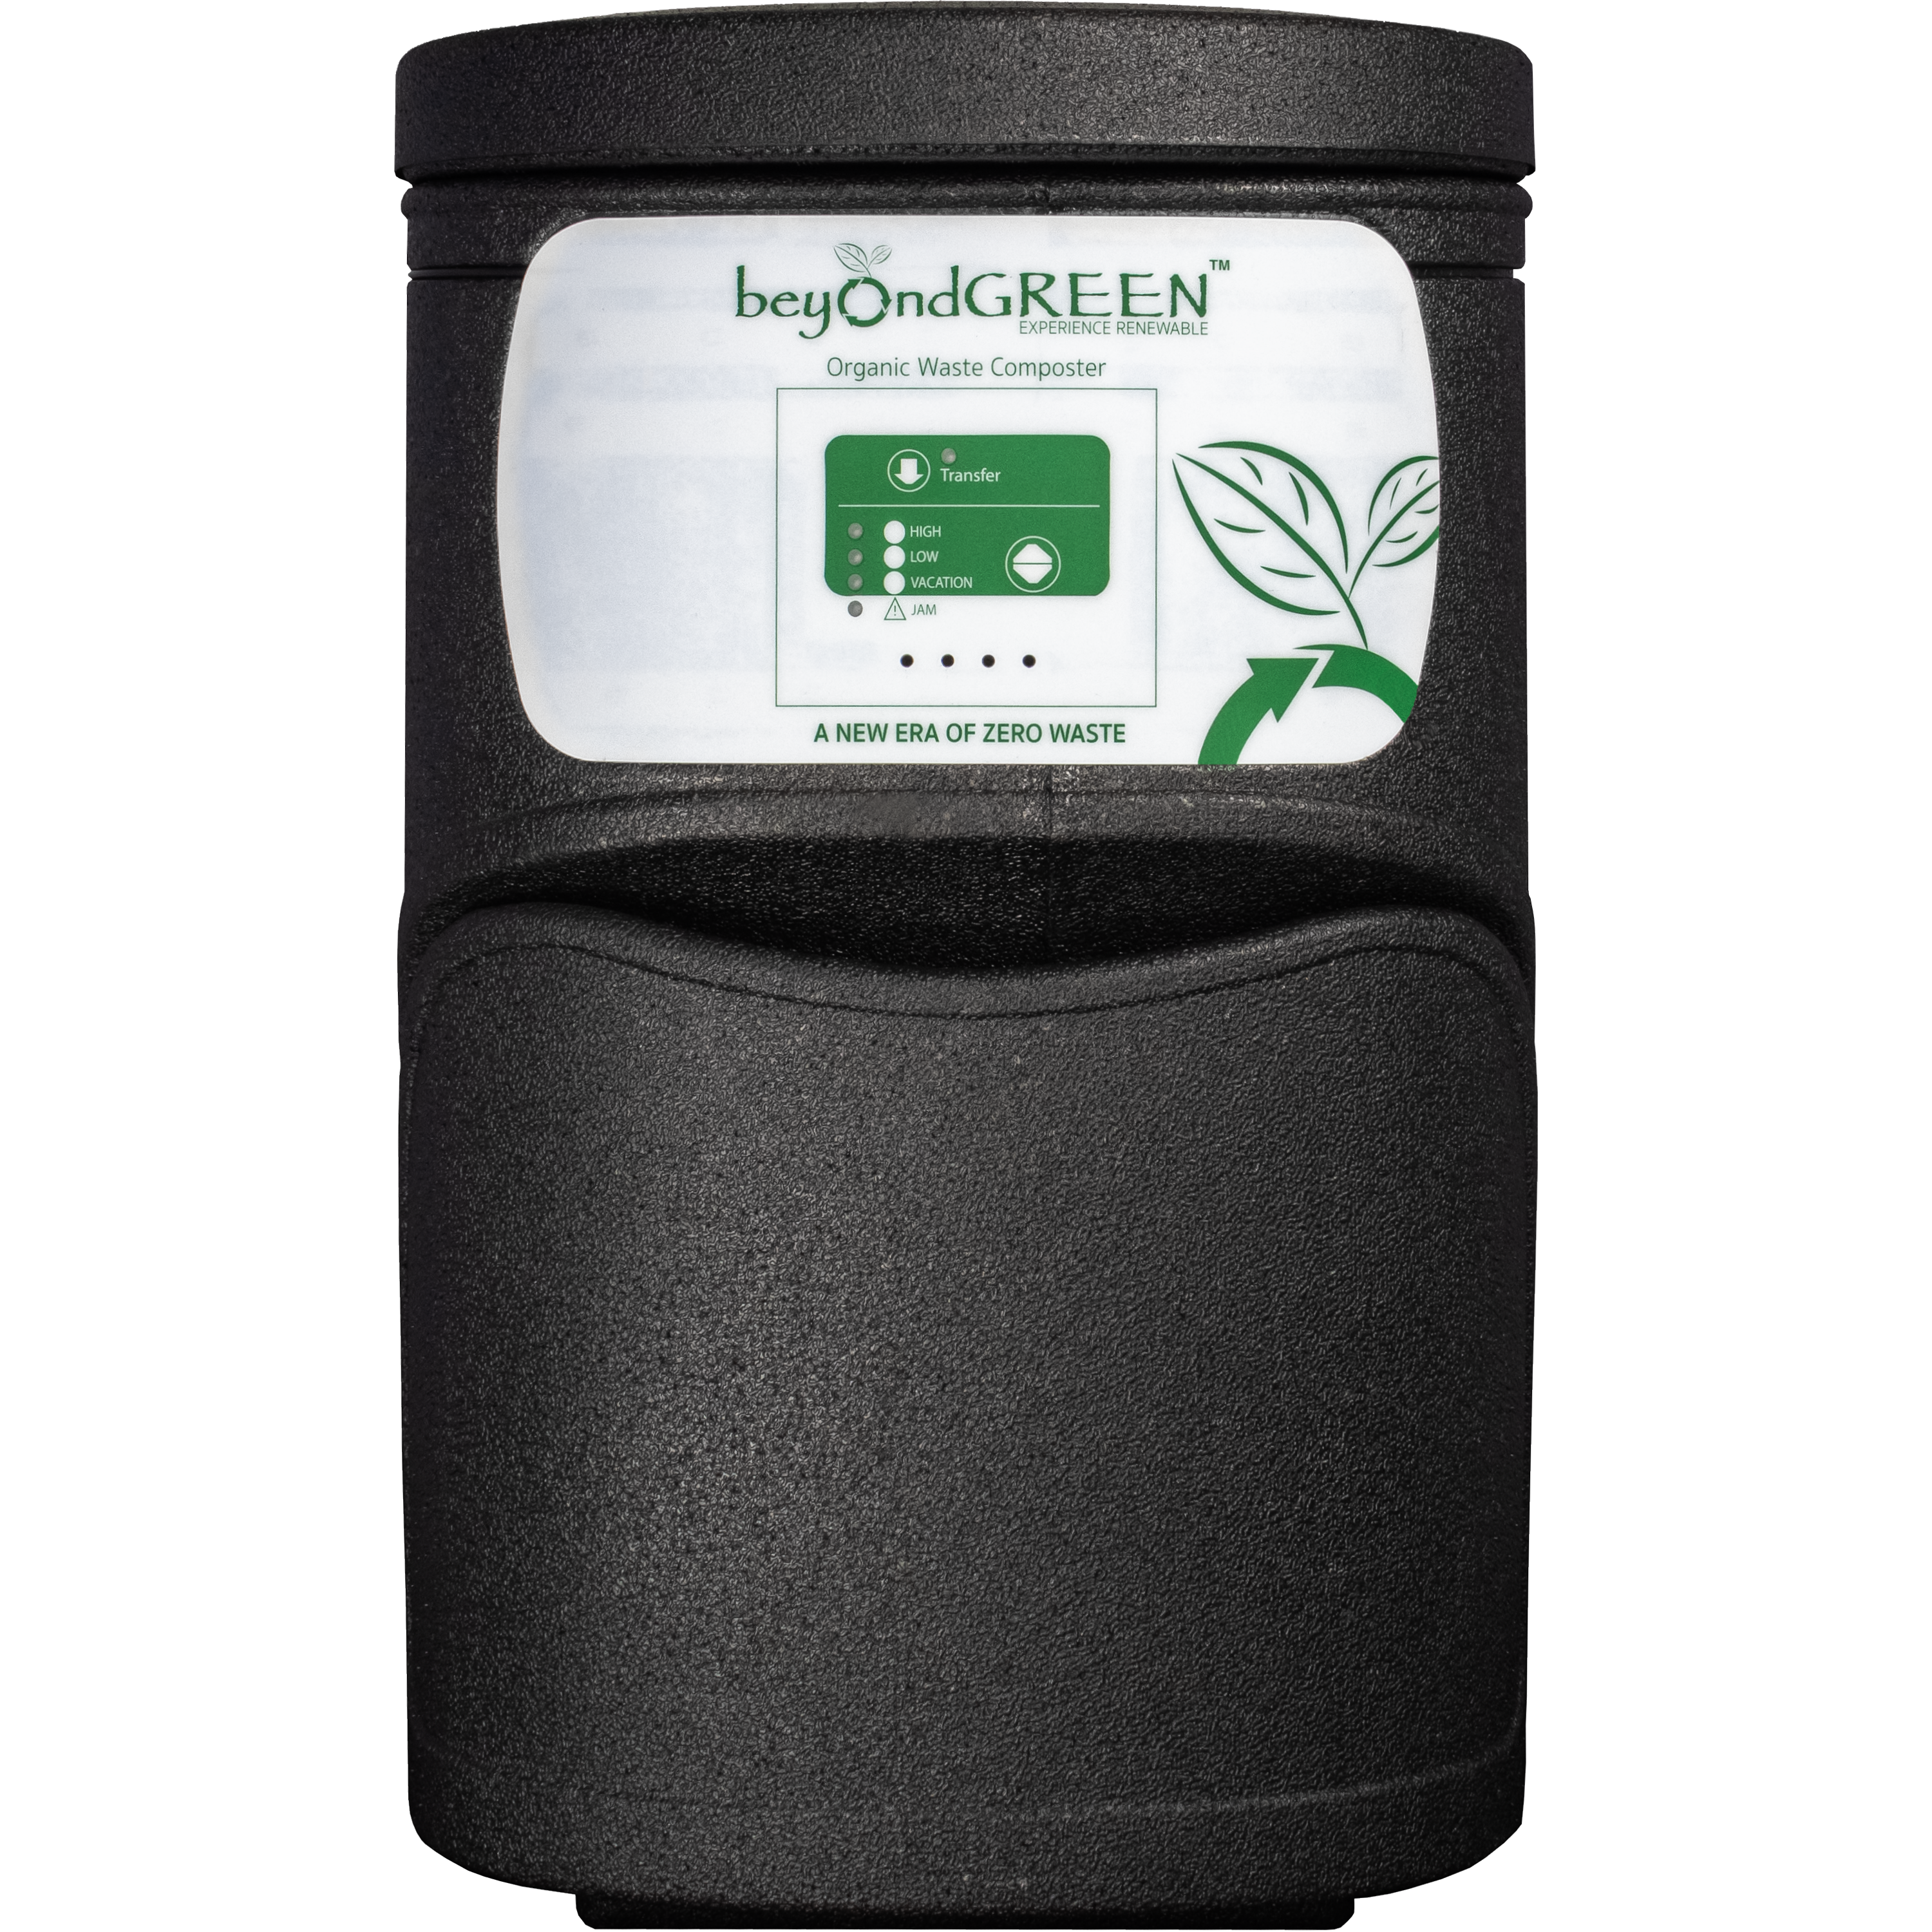 beyondGREEN All-Electric Organic Waste and Pet Waste Composter